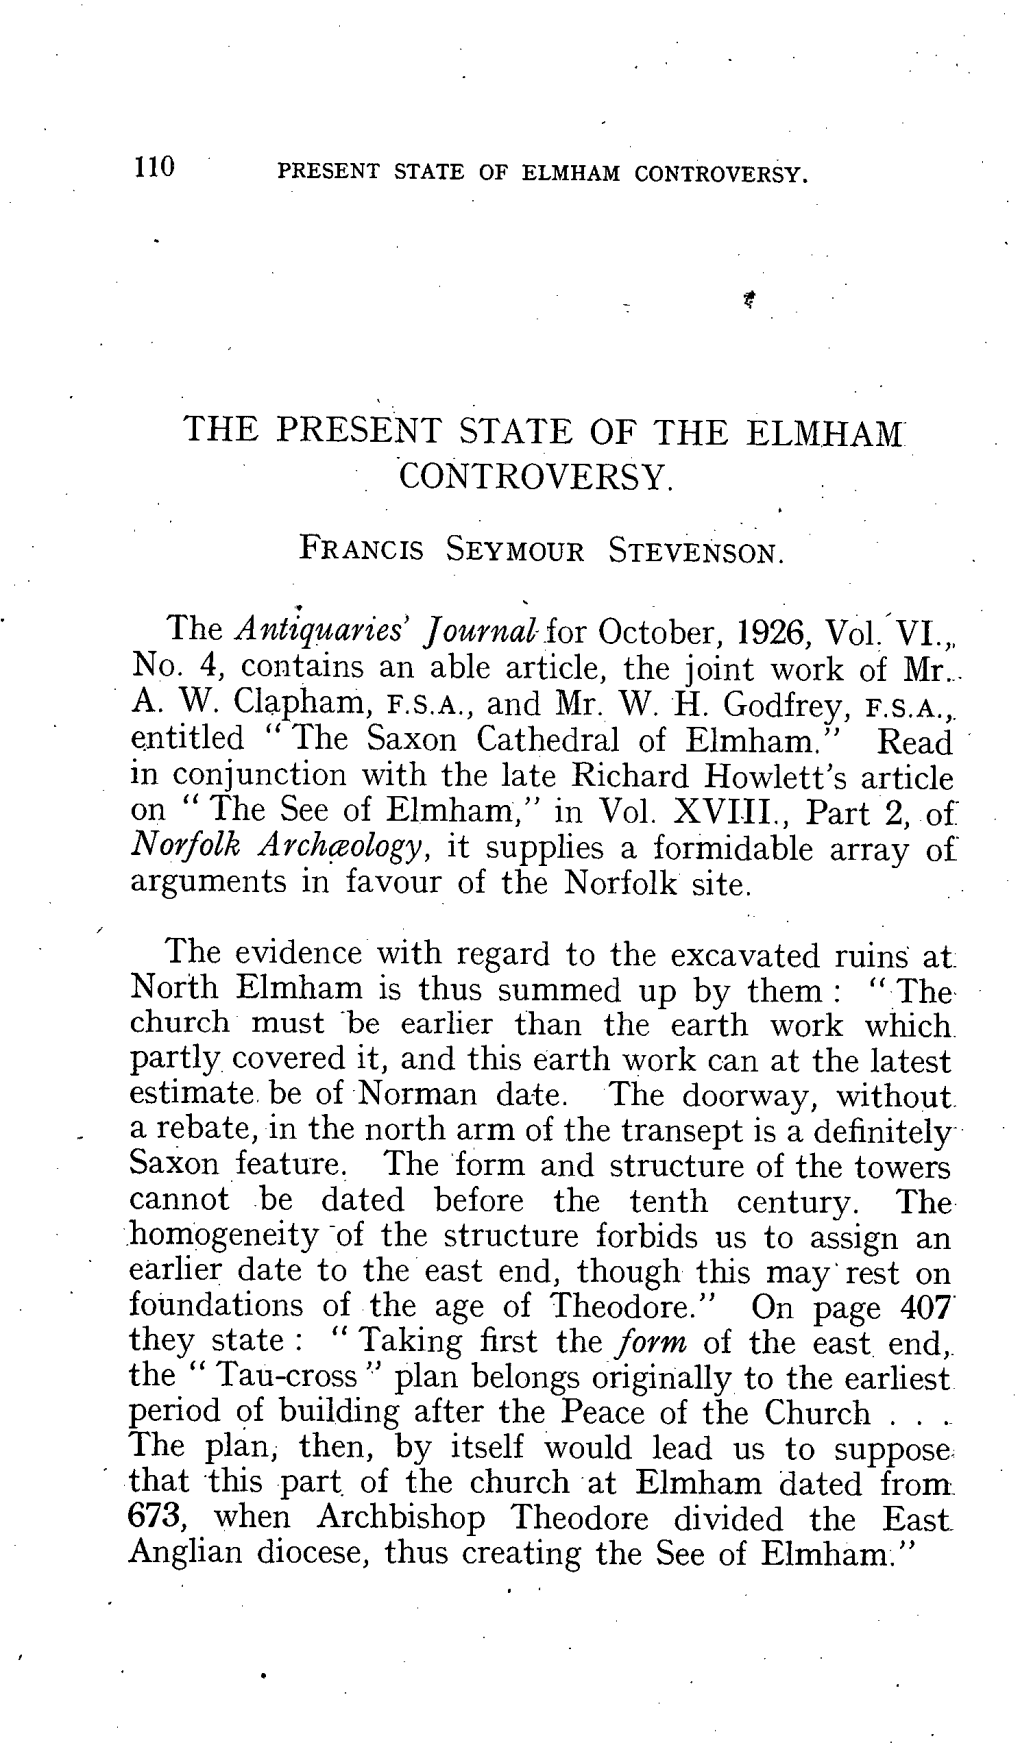 The Present State of the Elmham Controversy F. S. Stevenson